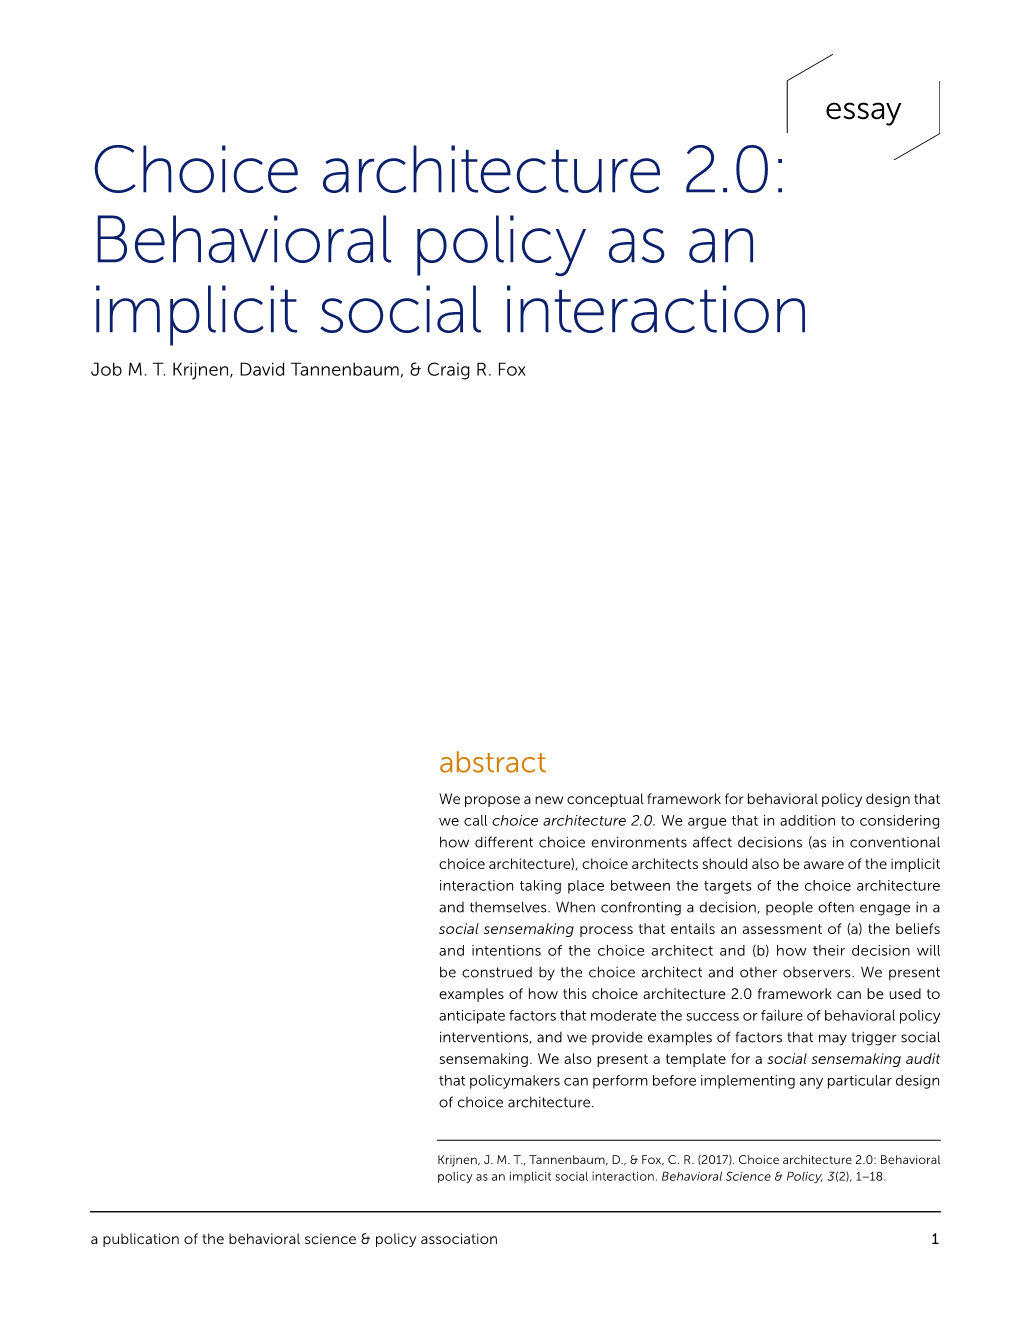 Choice Architecture 2.0: Behavioral Policy As an Implicit Social Interaction Job M